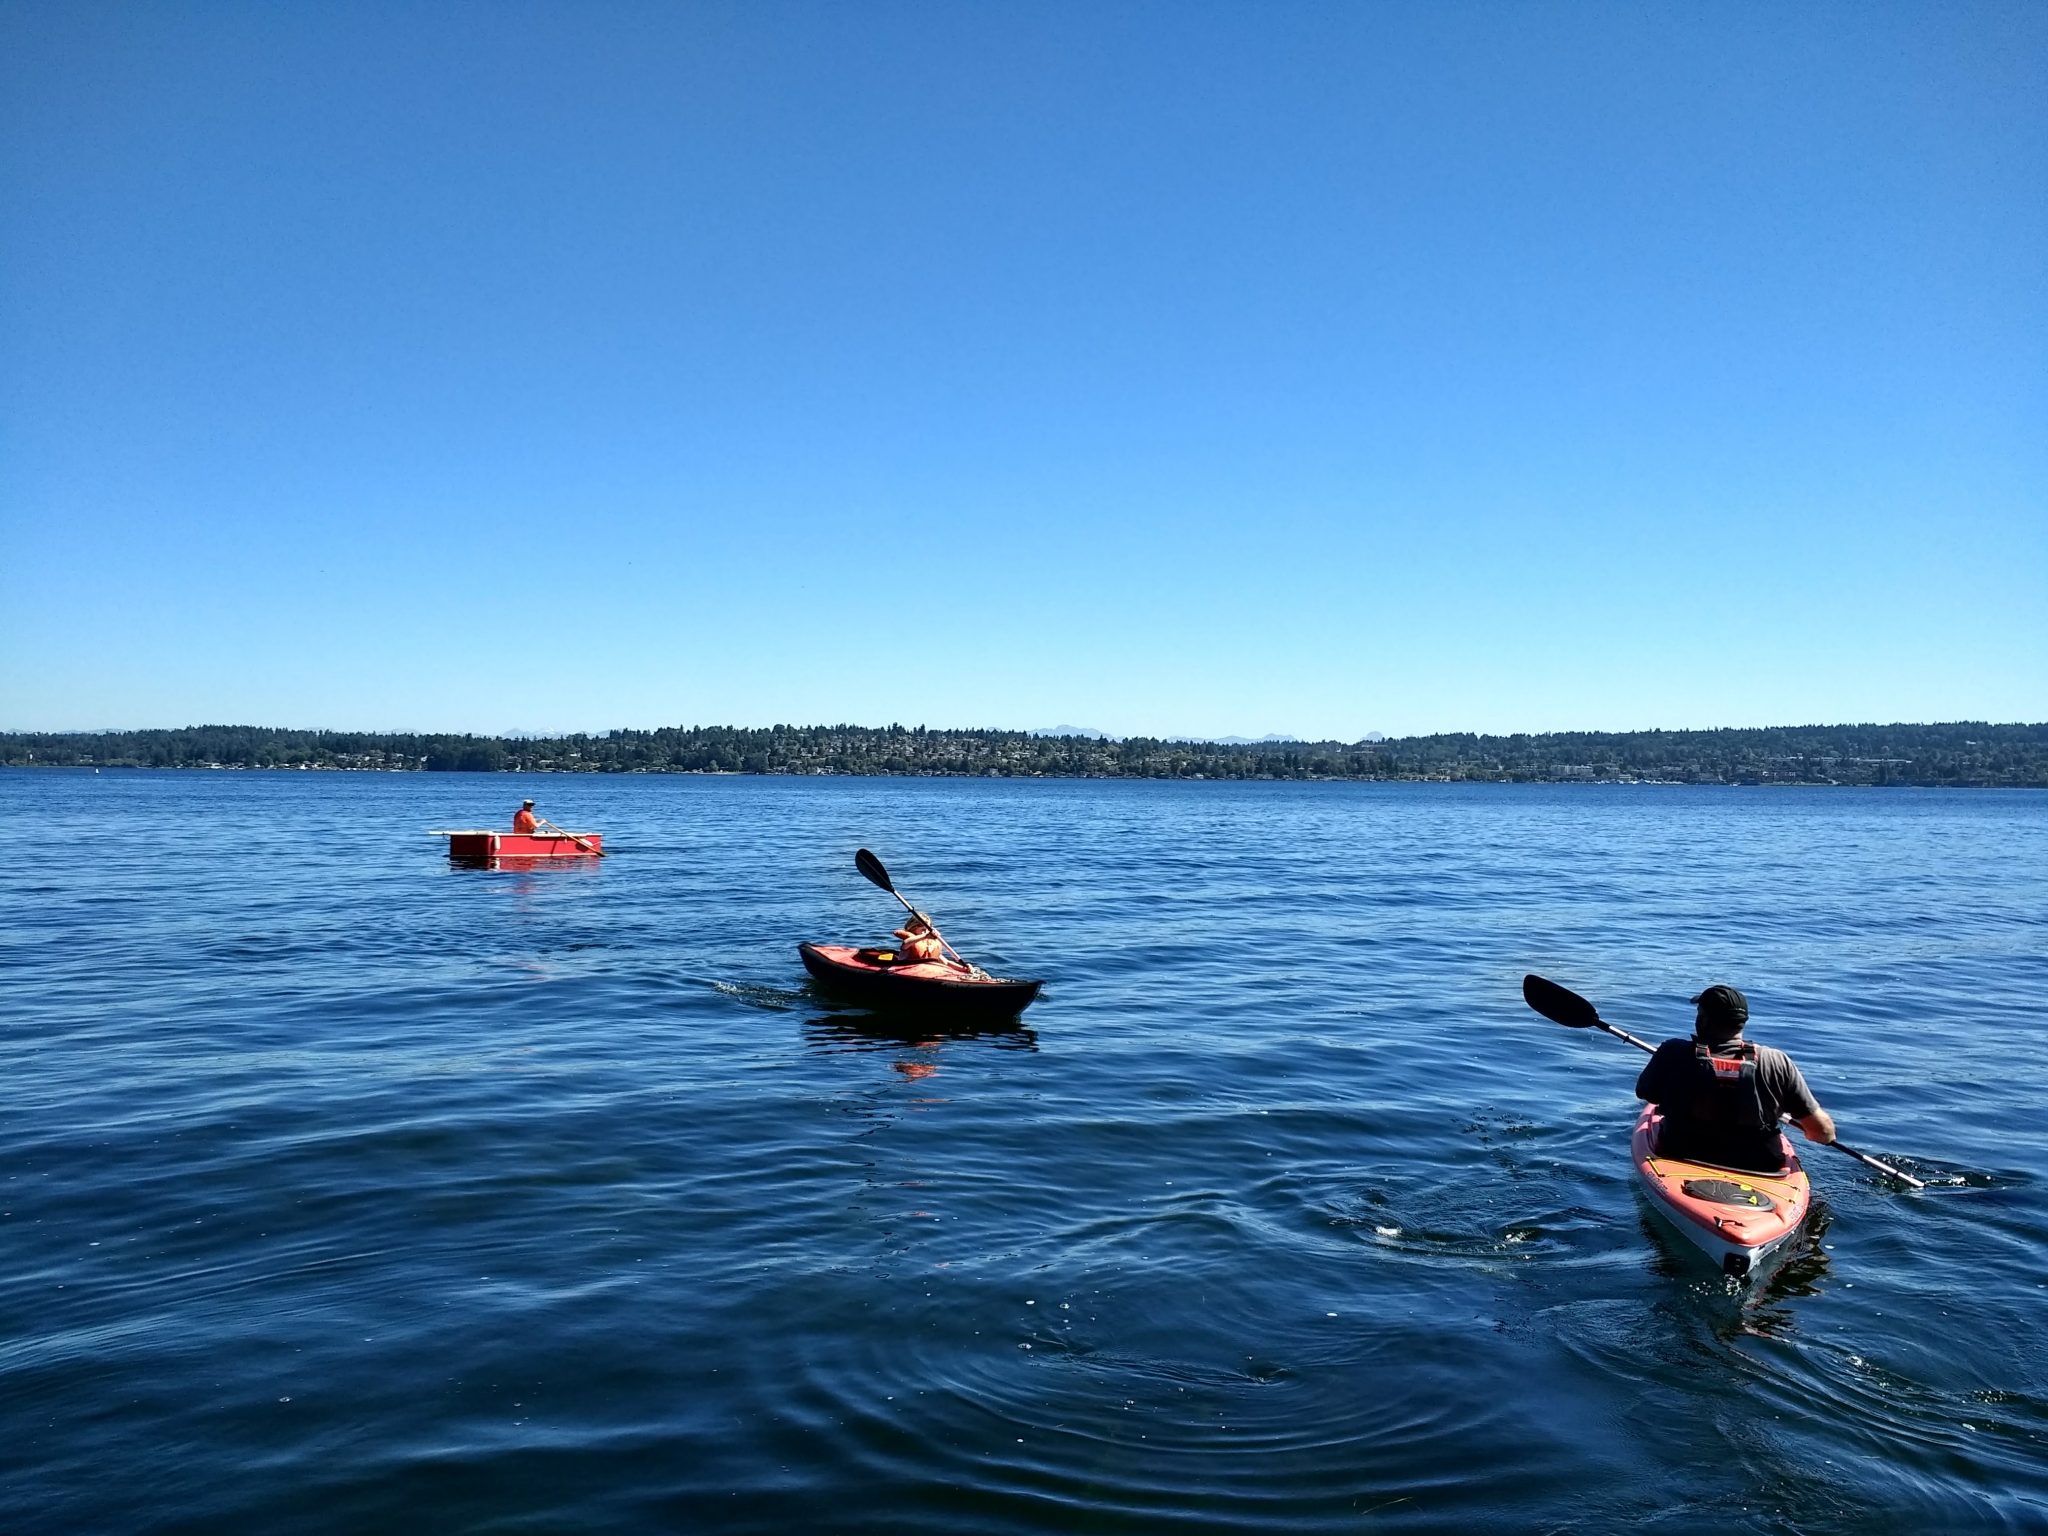 Two kayakers and a rowboater are in on a lake on a sunny day. The boats are facing in different directions. There is a forested hill with houses in the background